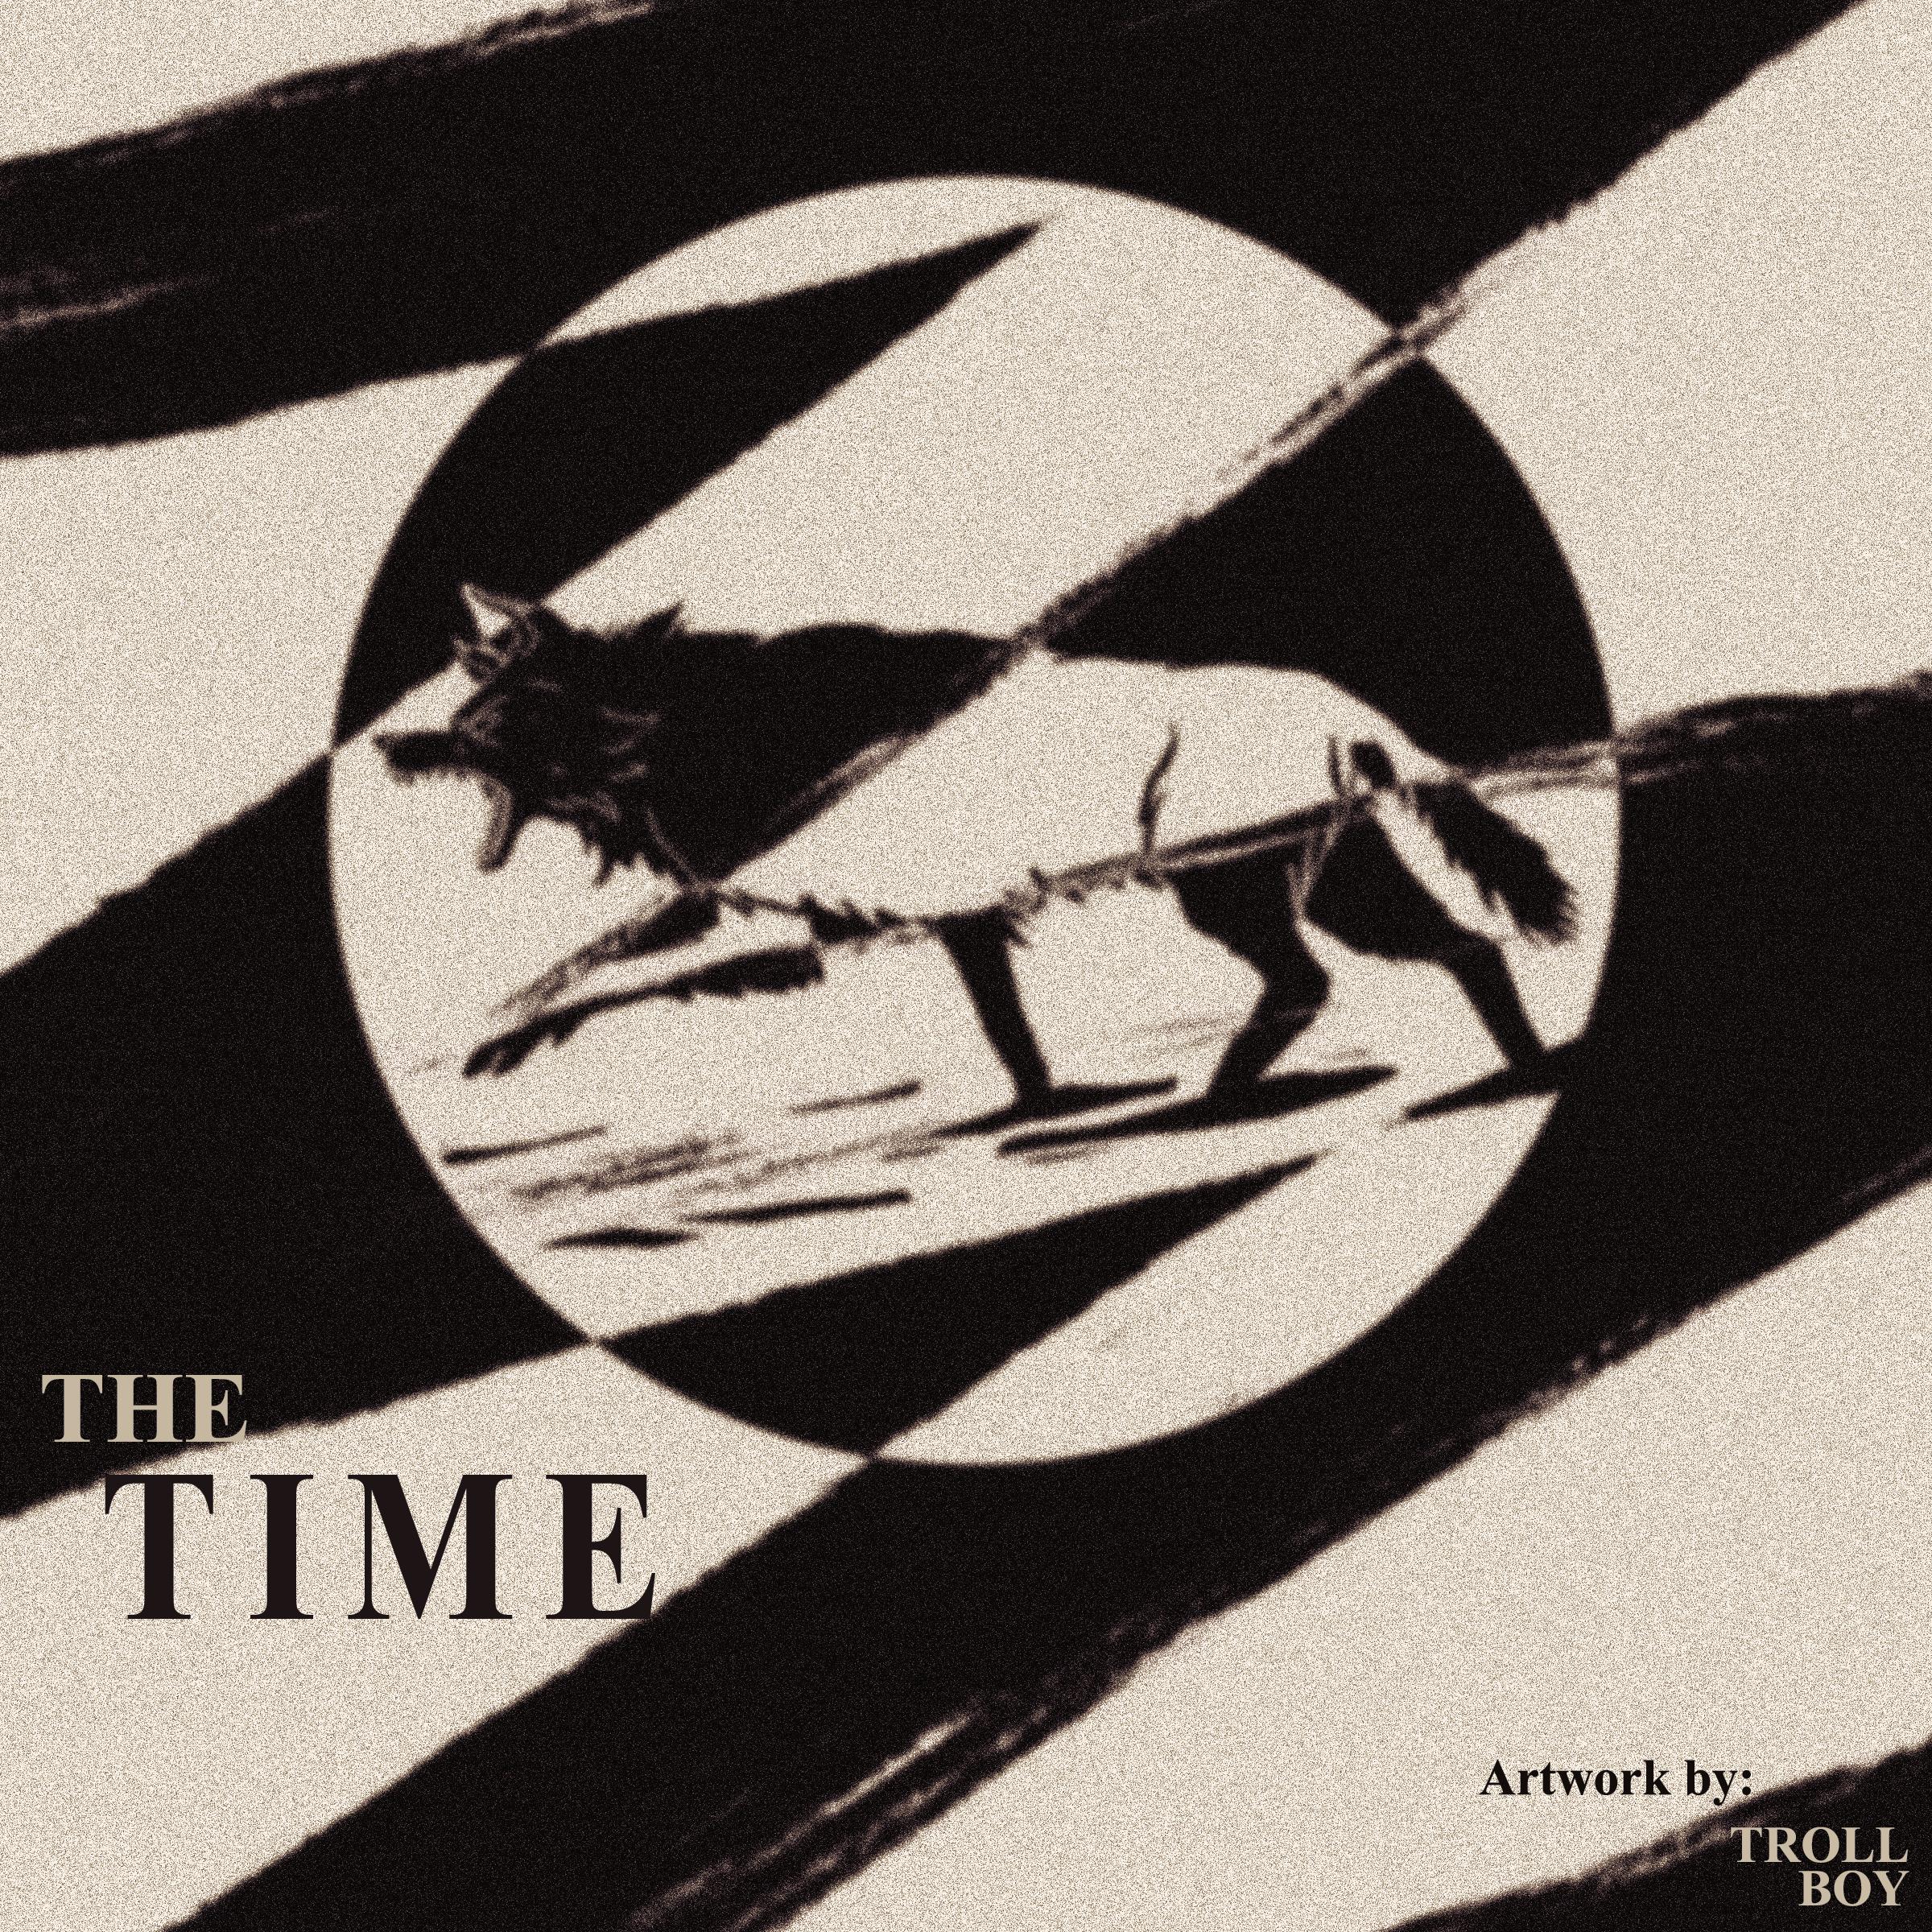 The Time by W7lF - Artwork